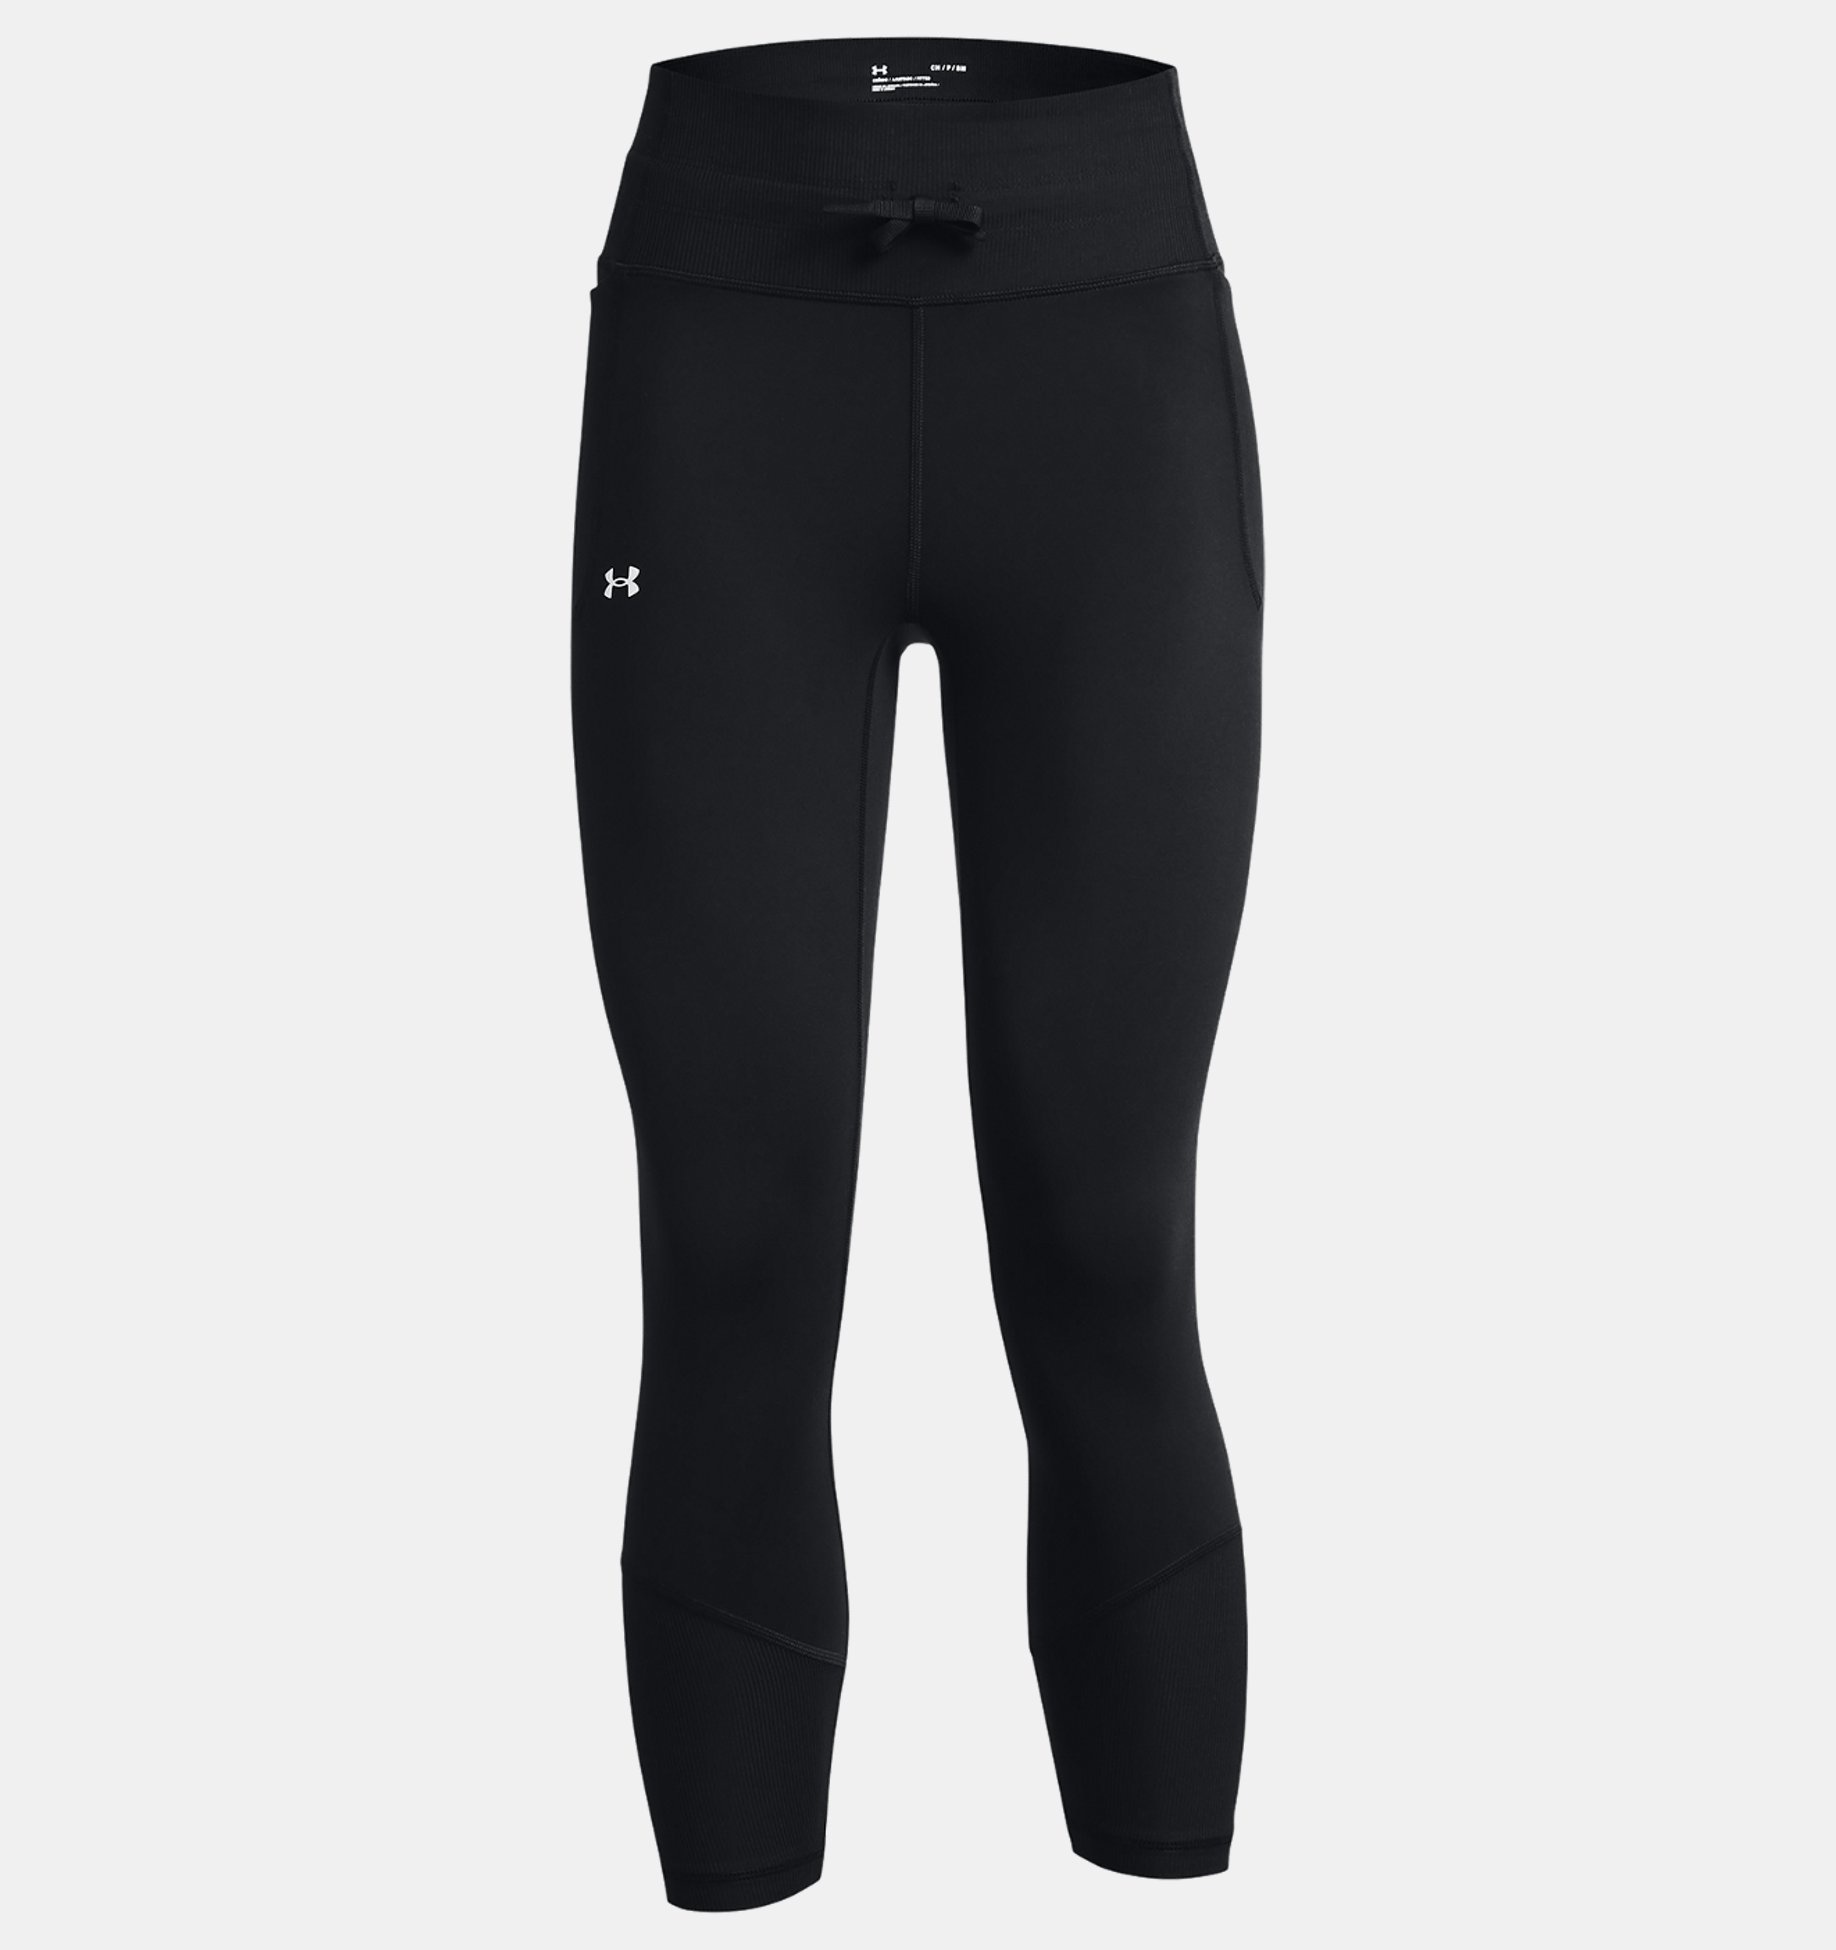 Under Armour, Meridian Leggings Womens, Performance Tights